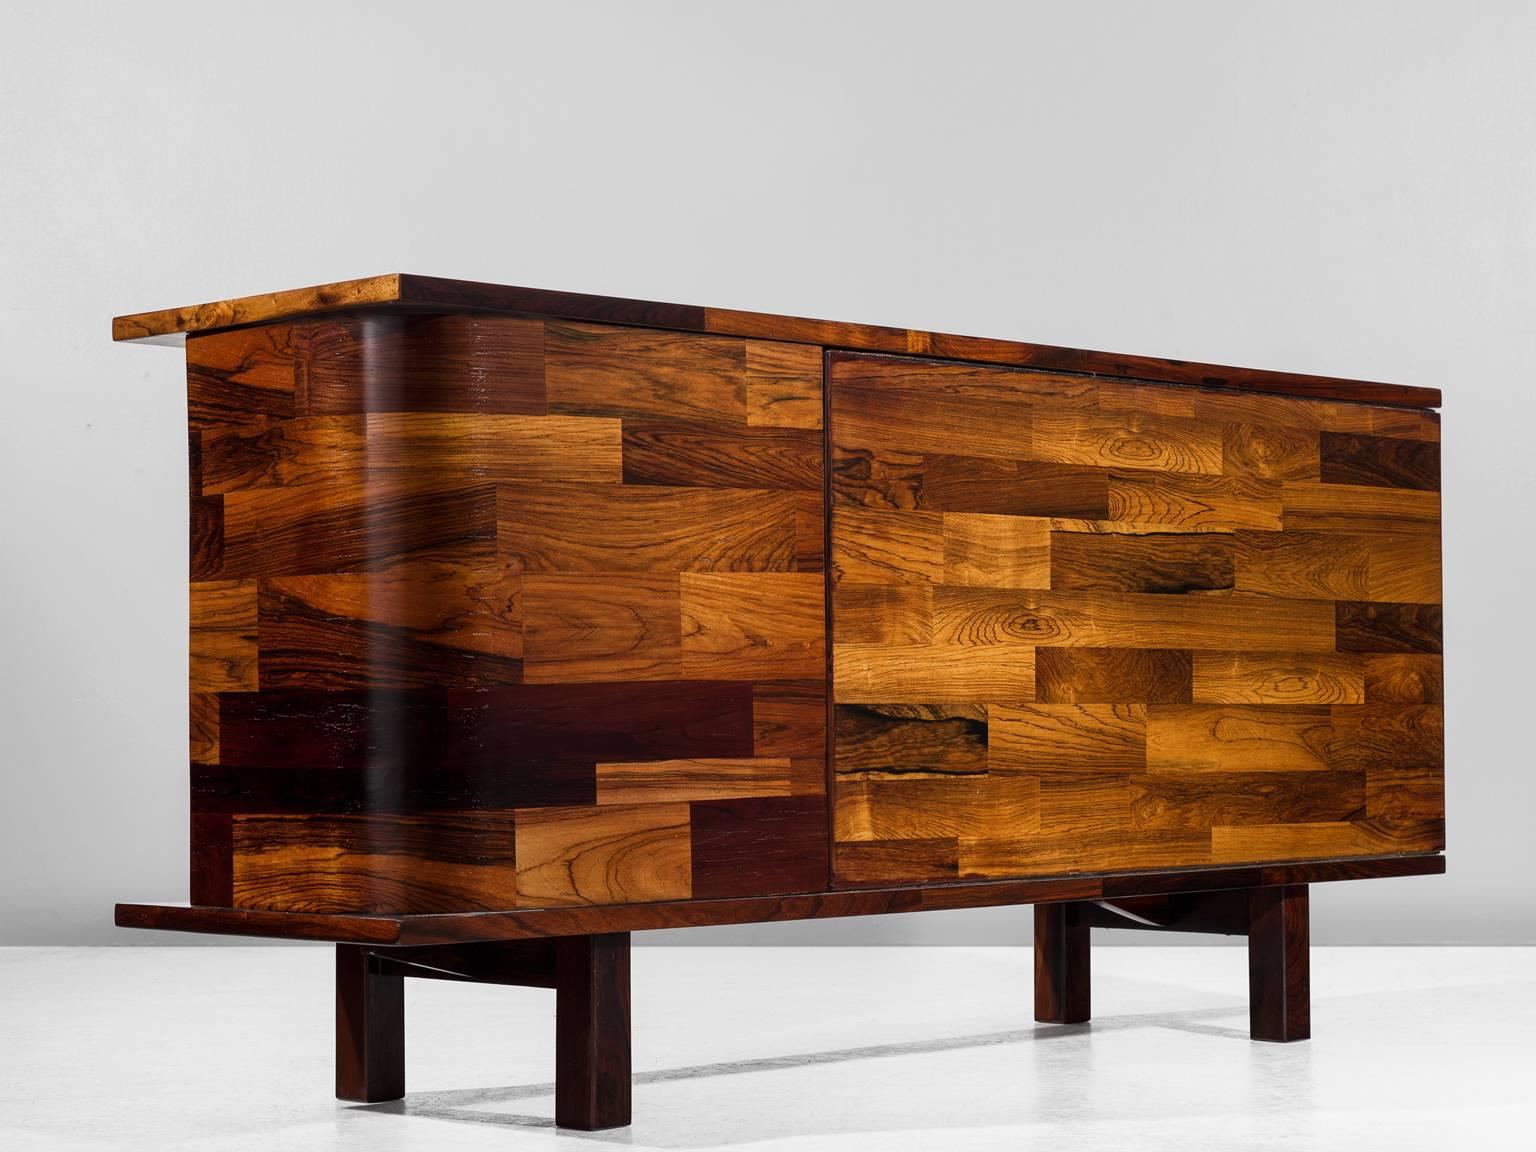 Jorge Zalszupin for L'Atelier, sideboard, rosewood, by Brazil, 1960s.

This wonderful little cabinet is designed by Jorge Zalszupin (1922-) for L'Atelier. Highly detailed inlaid rosewood veneer pieces which create this unique and exceptional